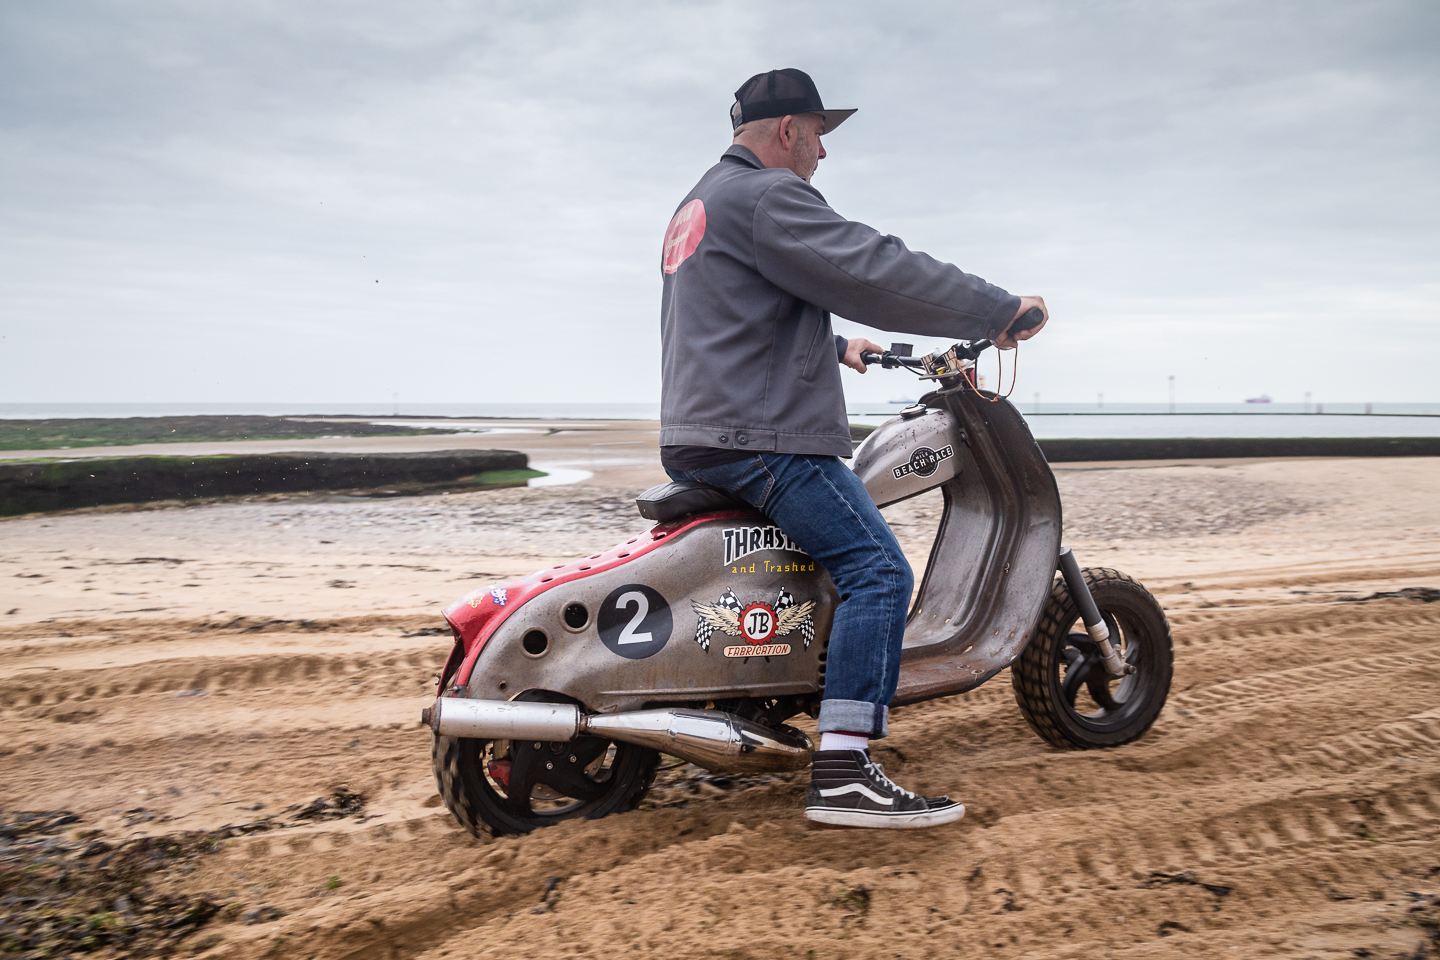 Scooter rider on Margate beach